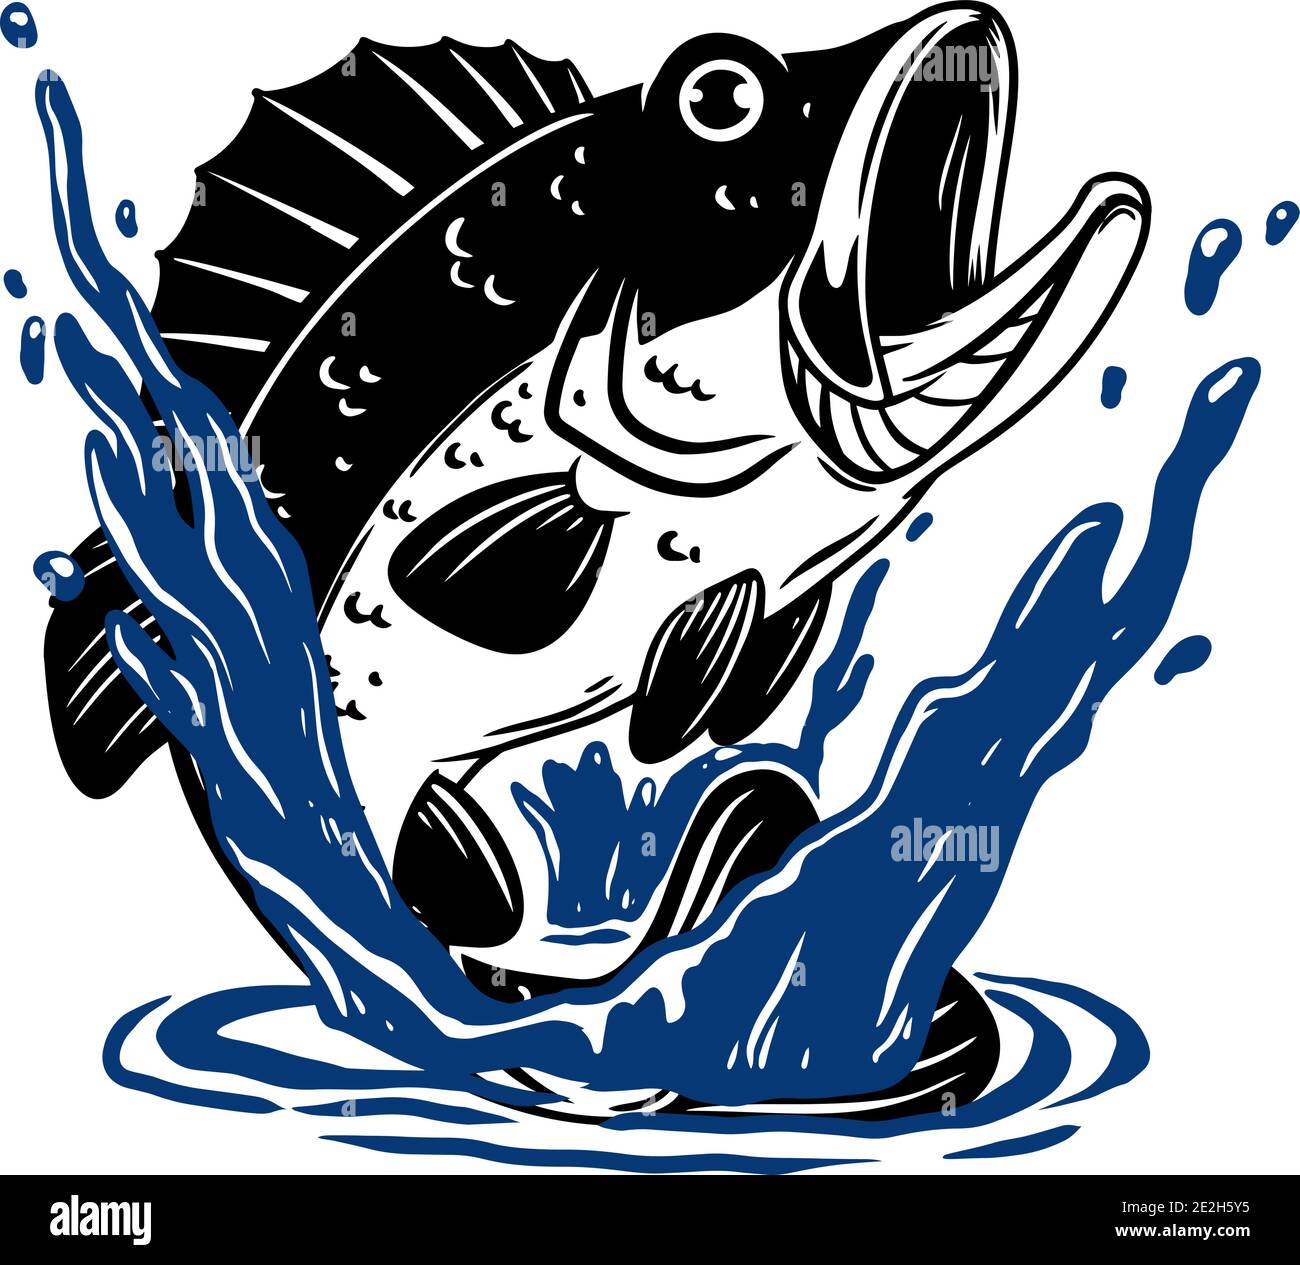 Illustration of bass fish in water. Design element for poster